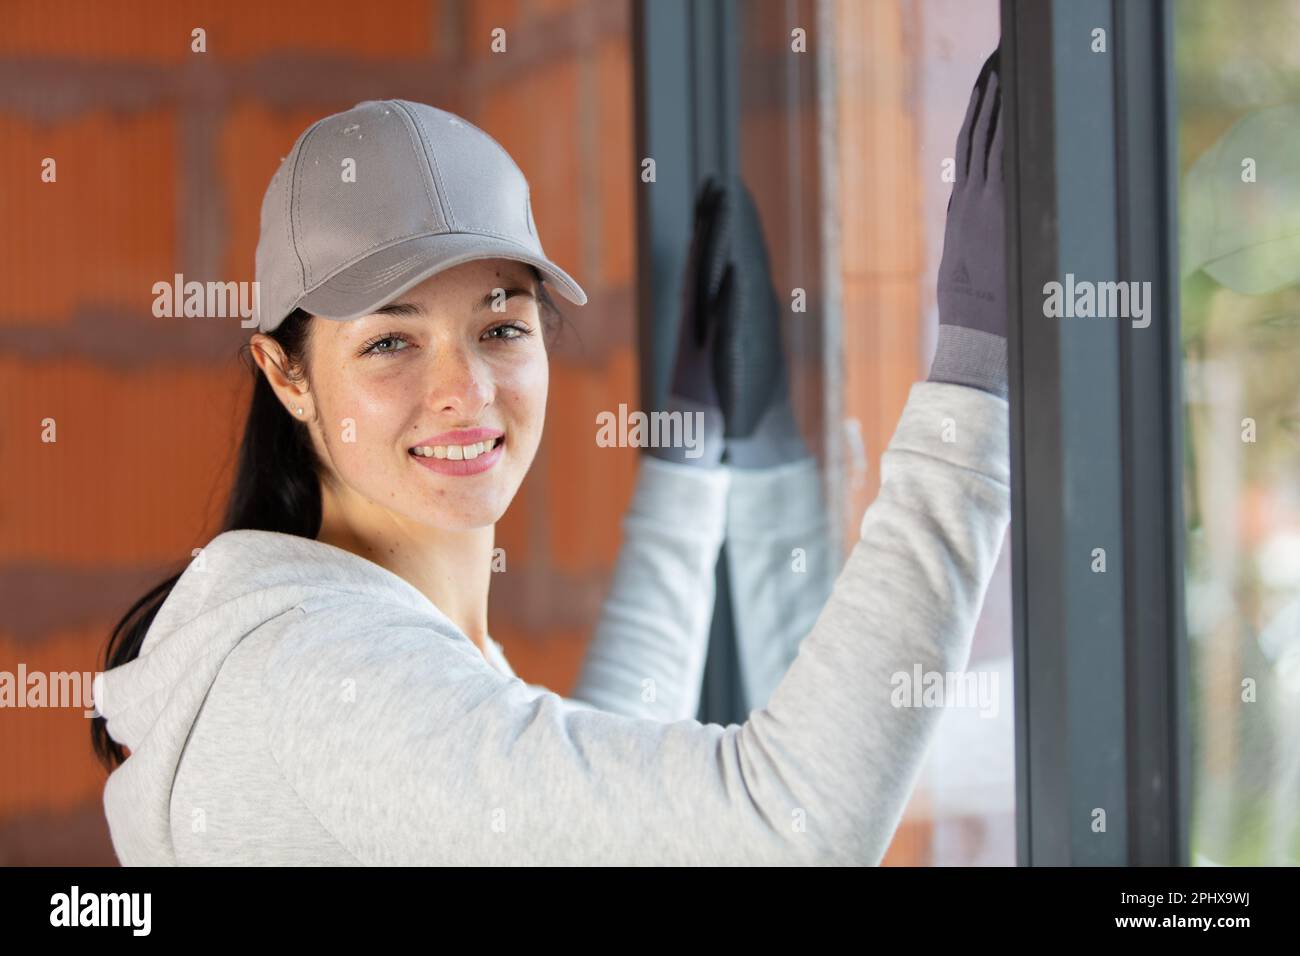 portrait of young female window fitter Stock Photo